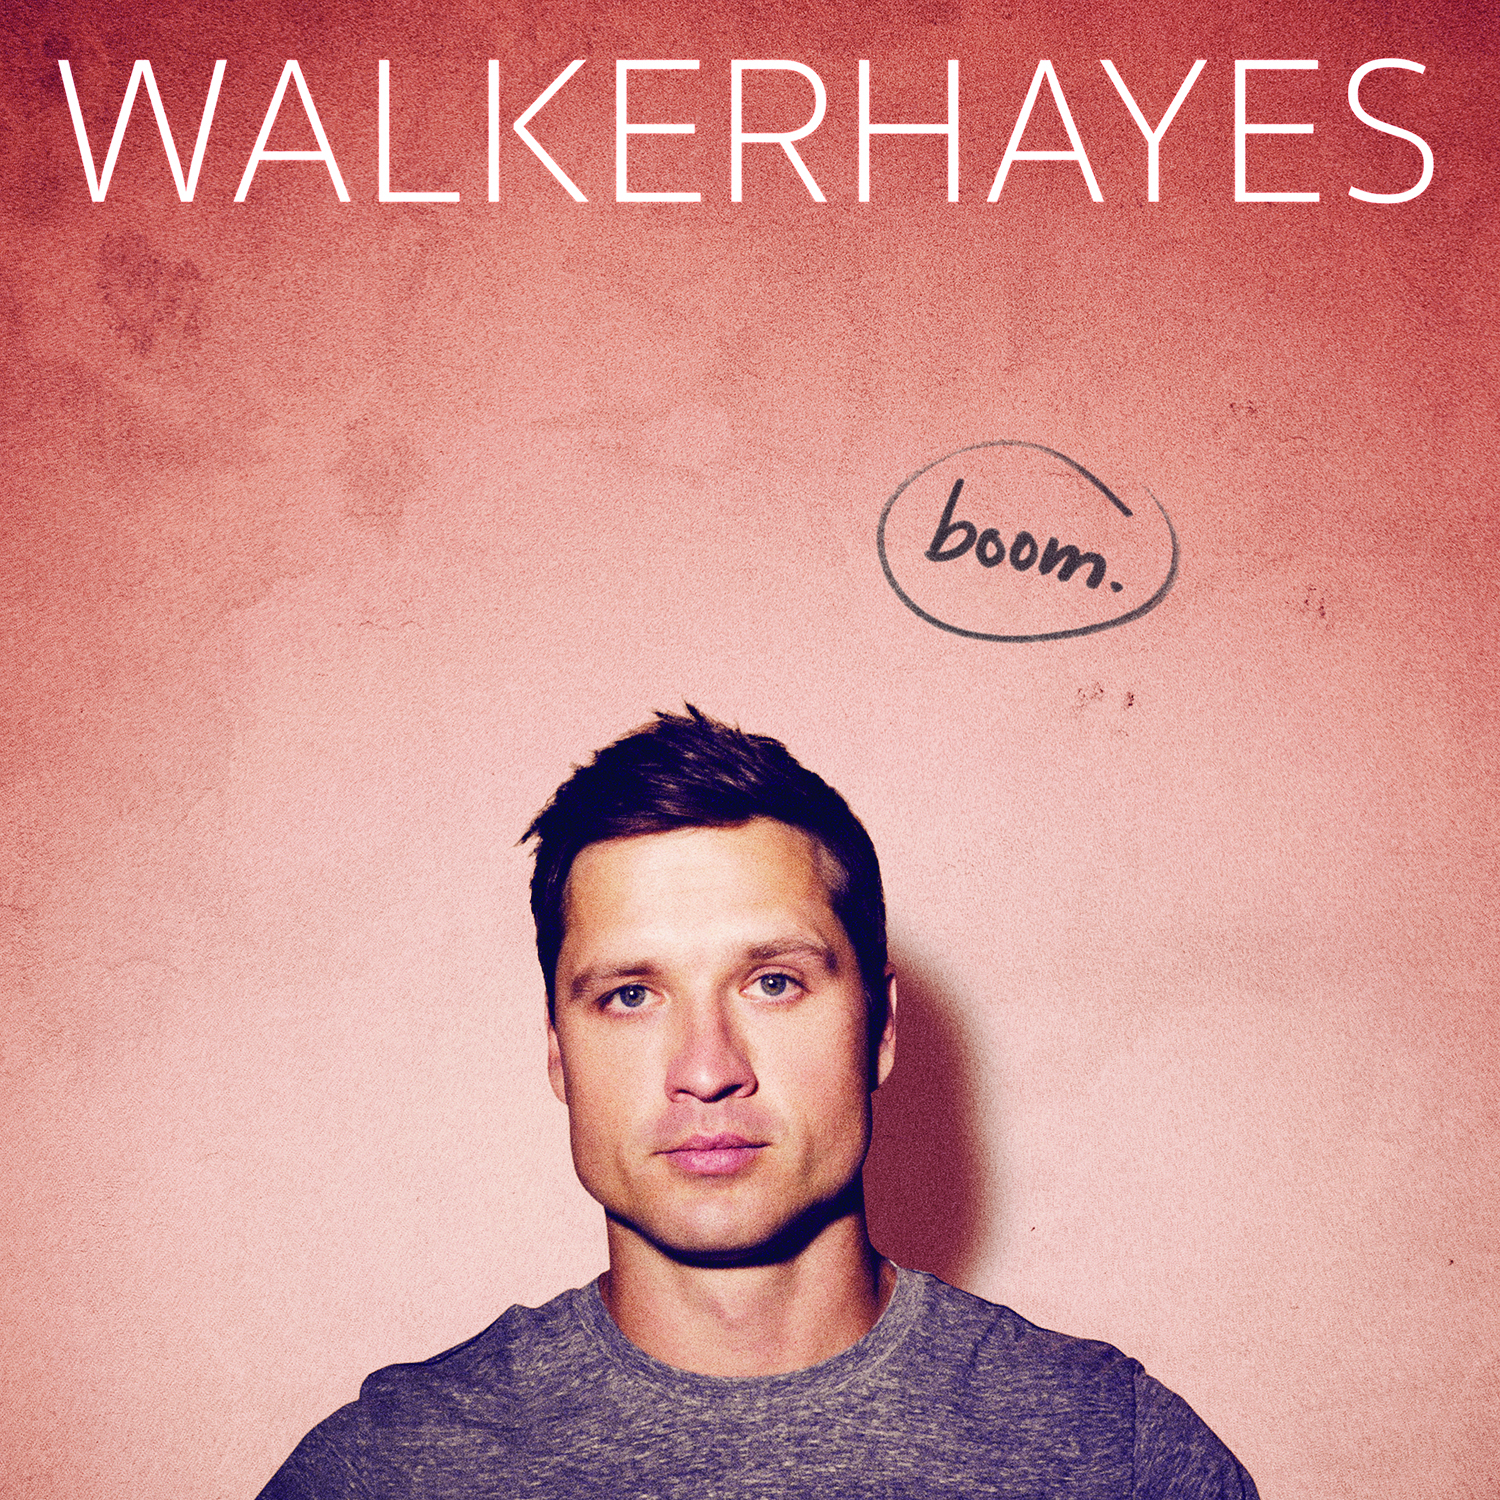 7 Quotes About Walker Hayes